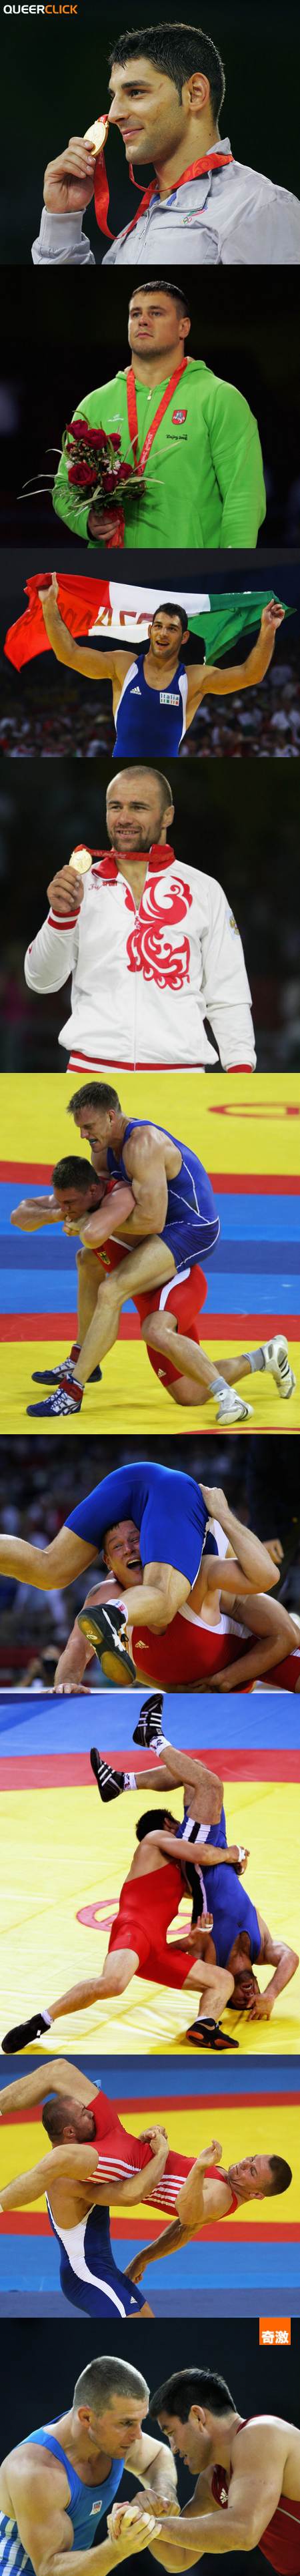 Olympic Hotties Day 6 Wrestling